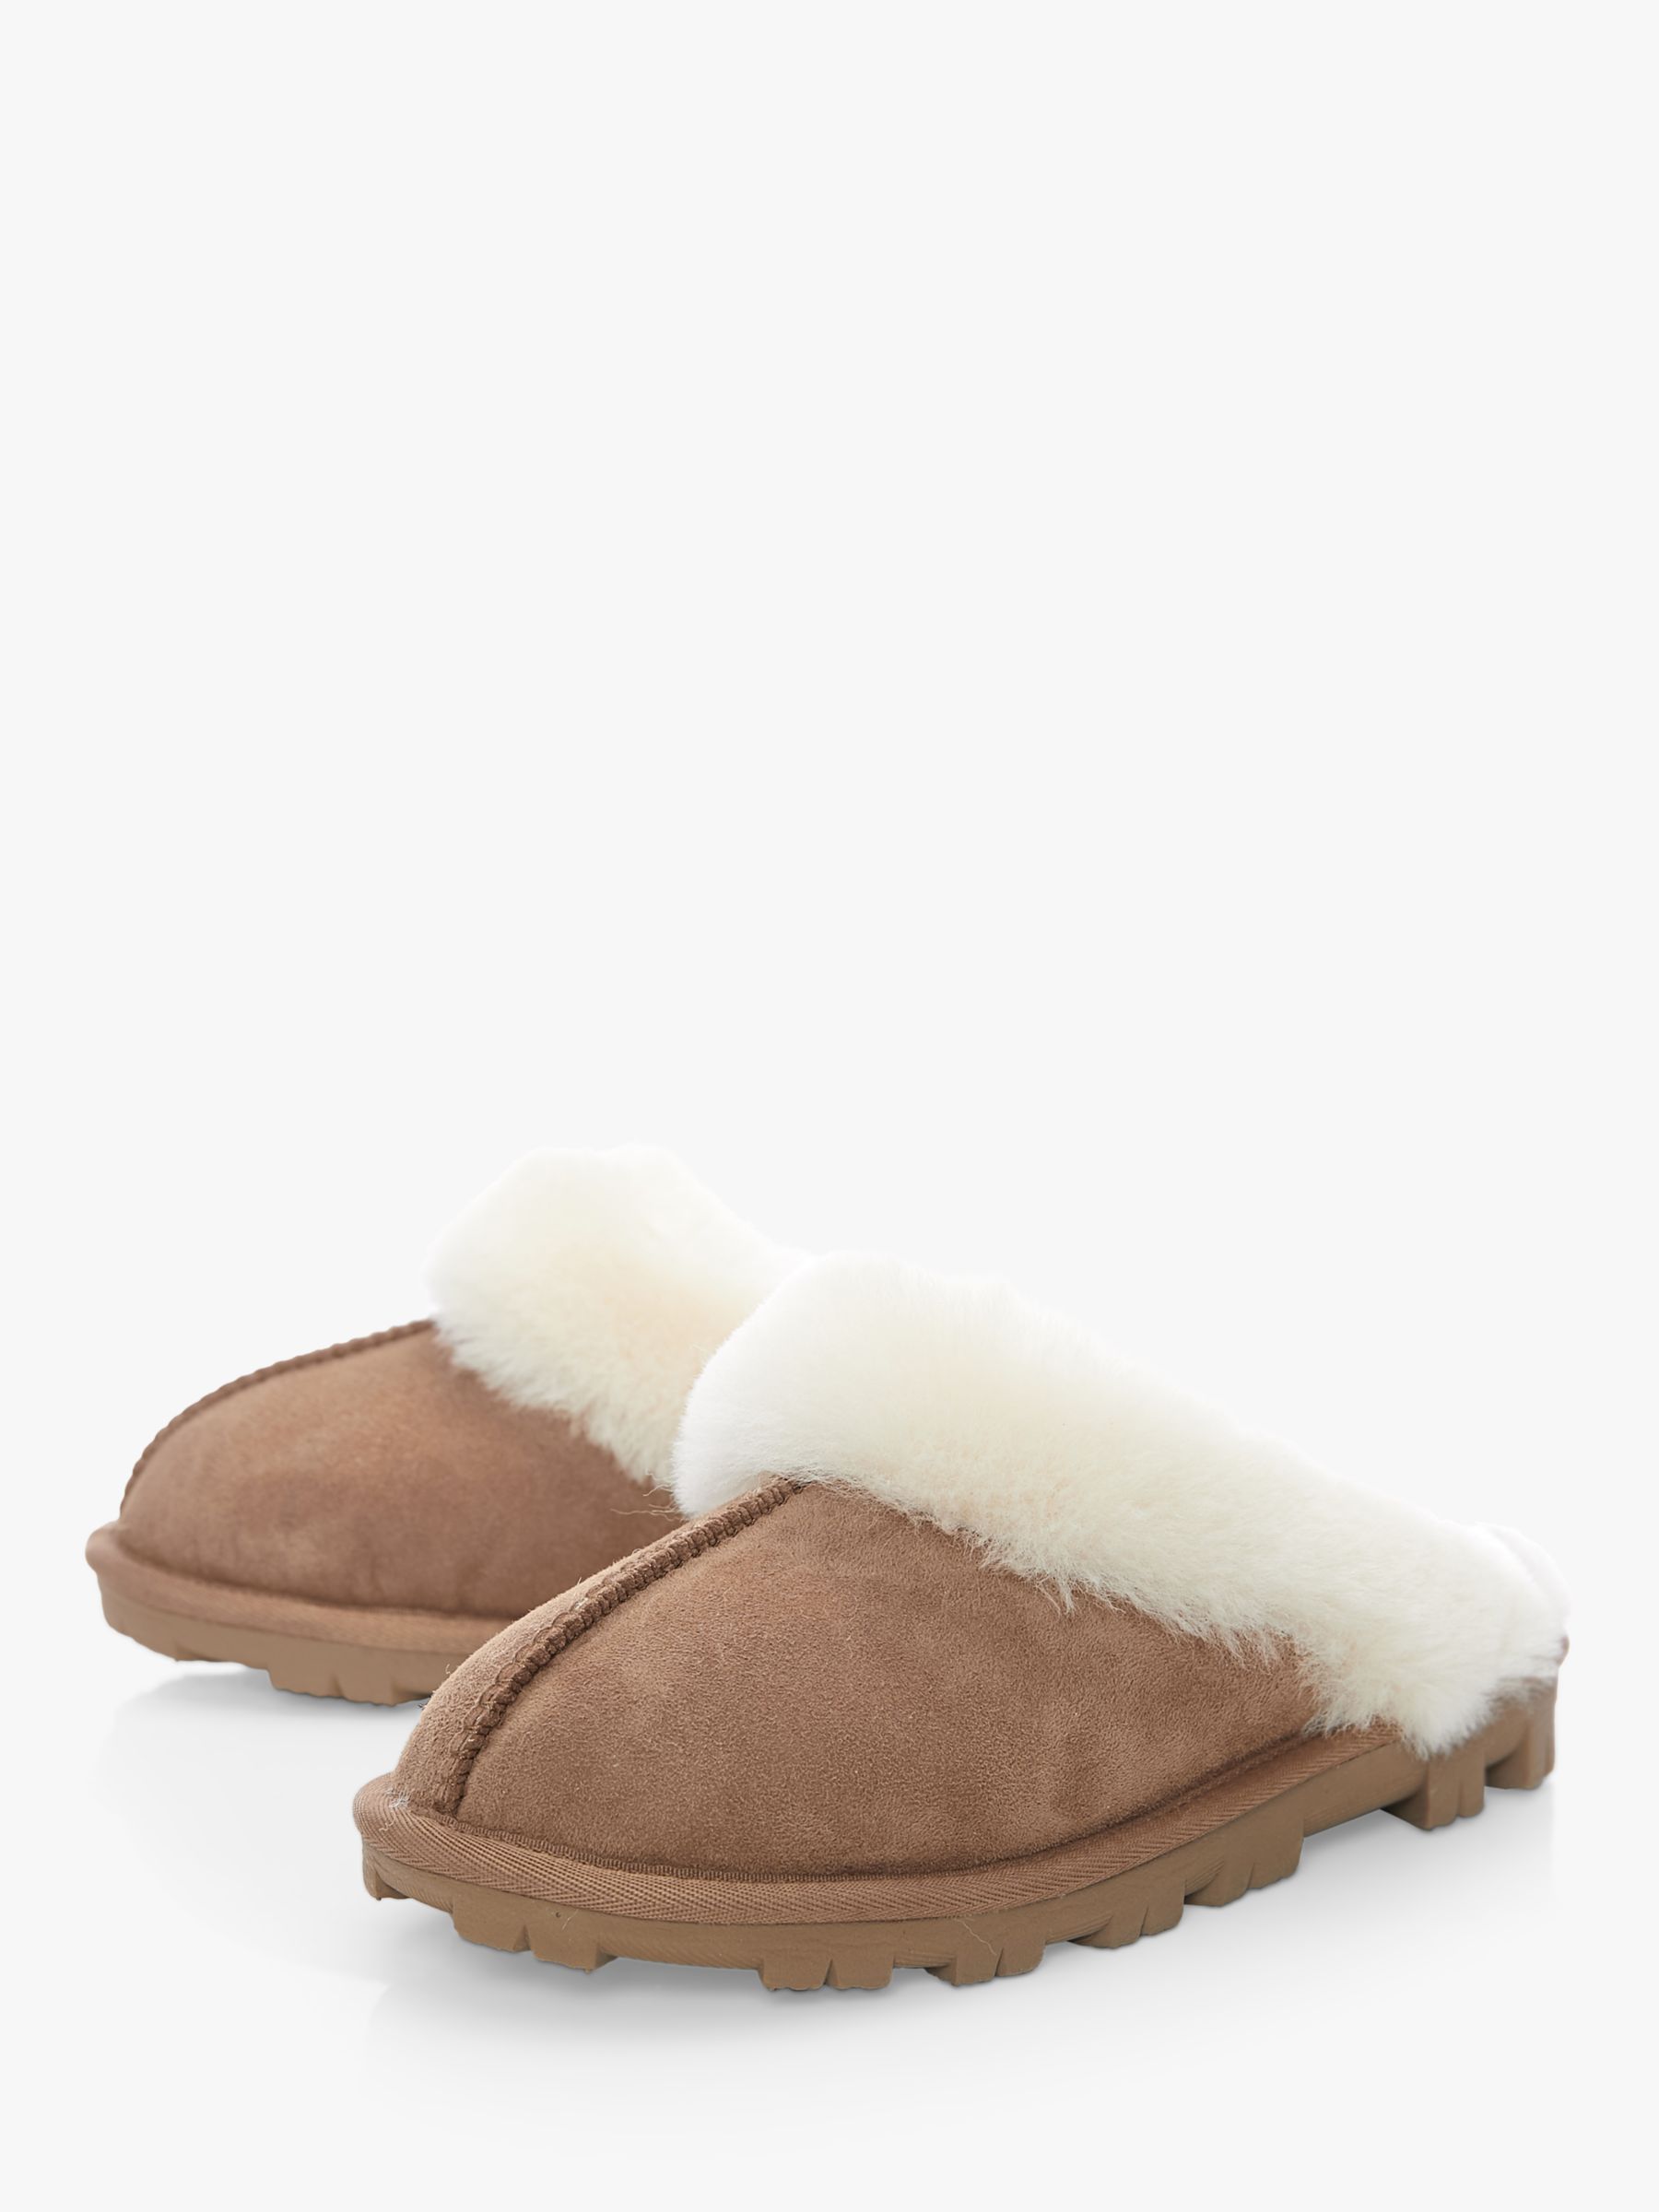 Moda In Pelle Cosie Sheepskin Slippers Tan At John Lewis And Partners 0192